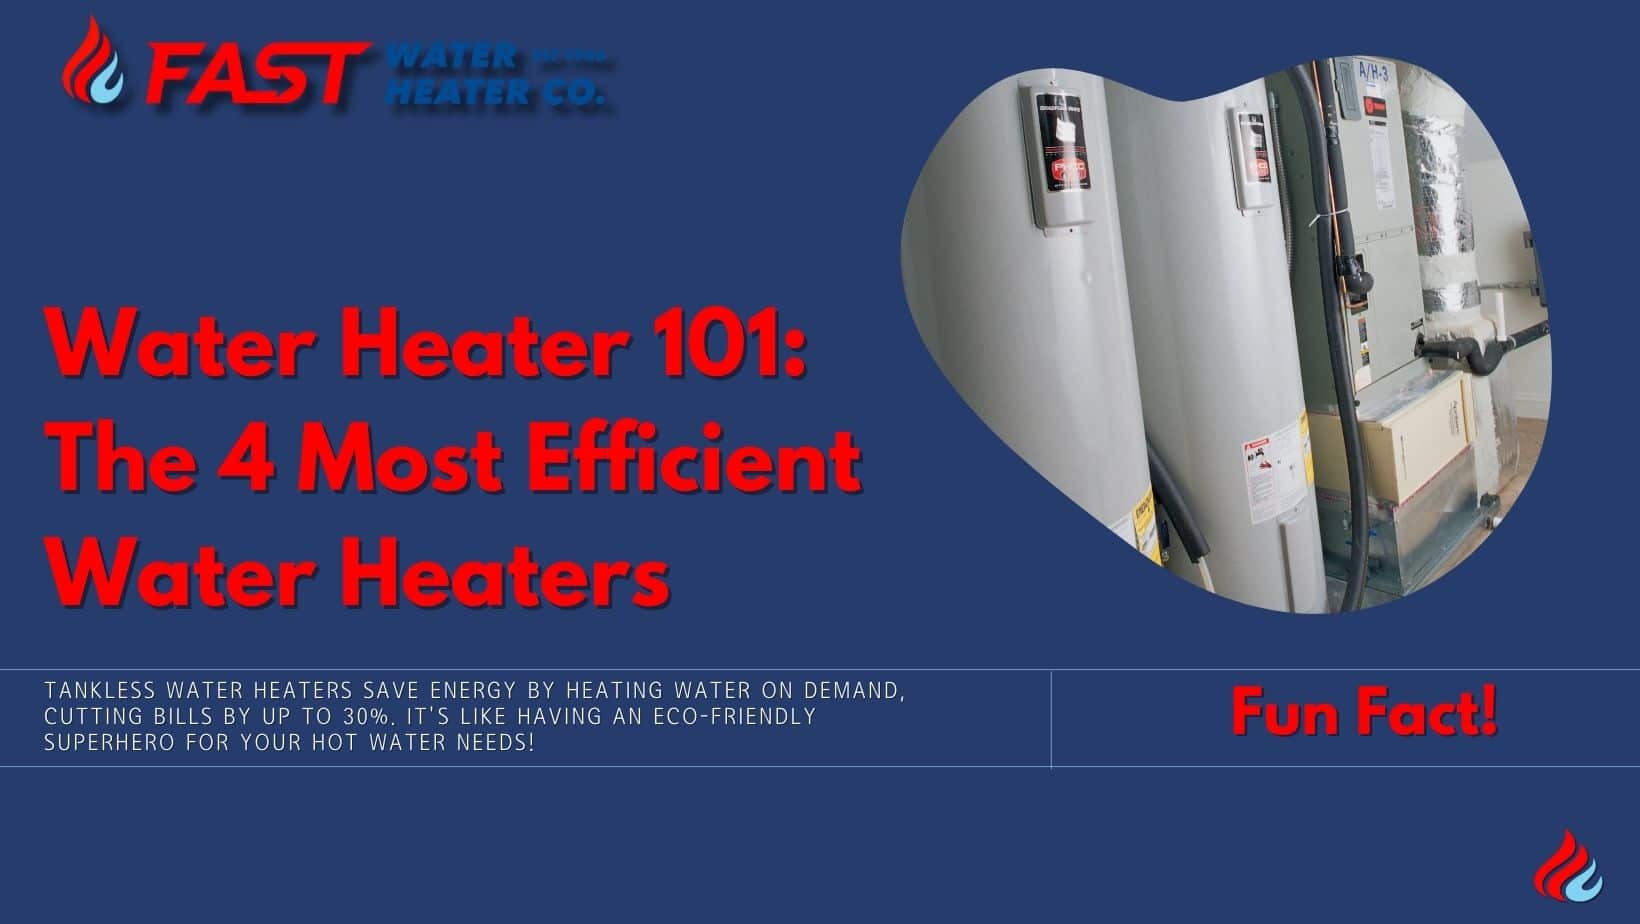 Tankless water heaters save energy by heating water on demand, cutting bills by up to 30%. It's like having an eco-friendly superhero for your hot water needs!